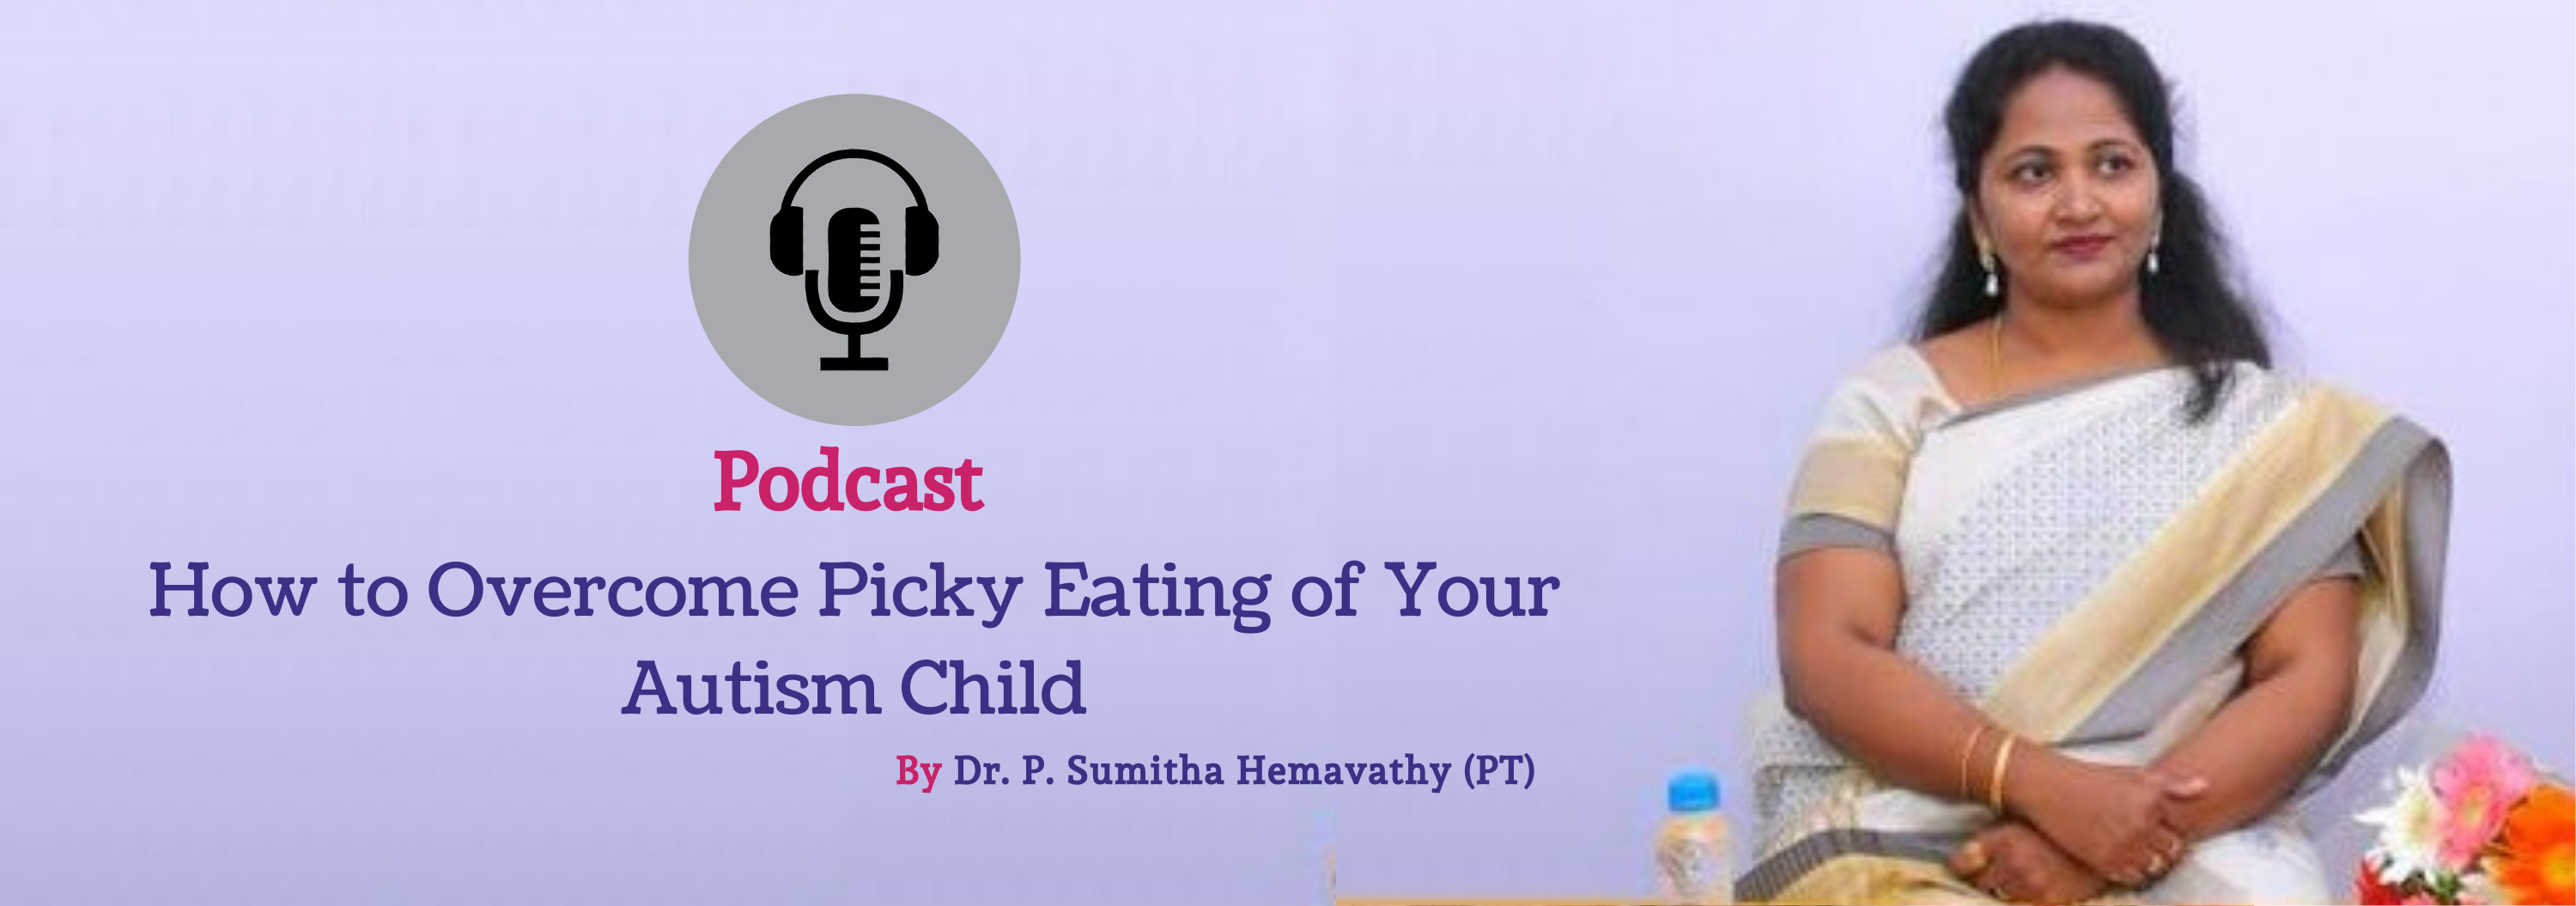 Podcast - How to Overcome Picky Eating of Your Autism Child